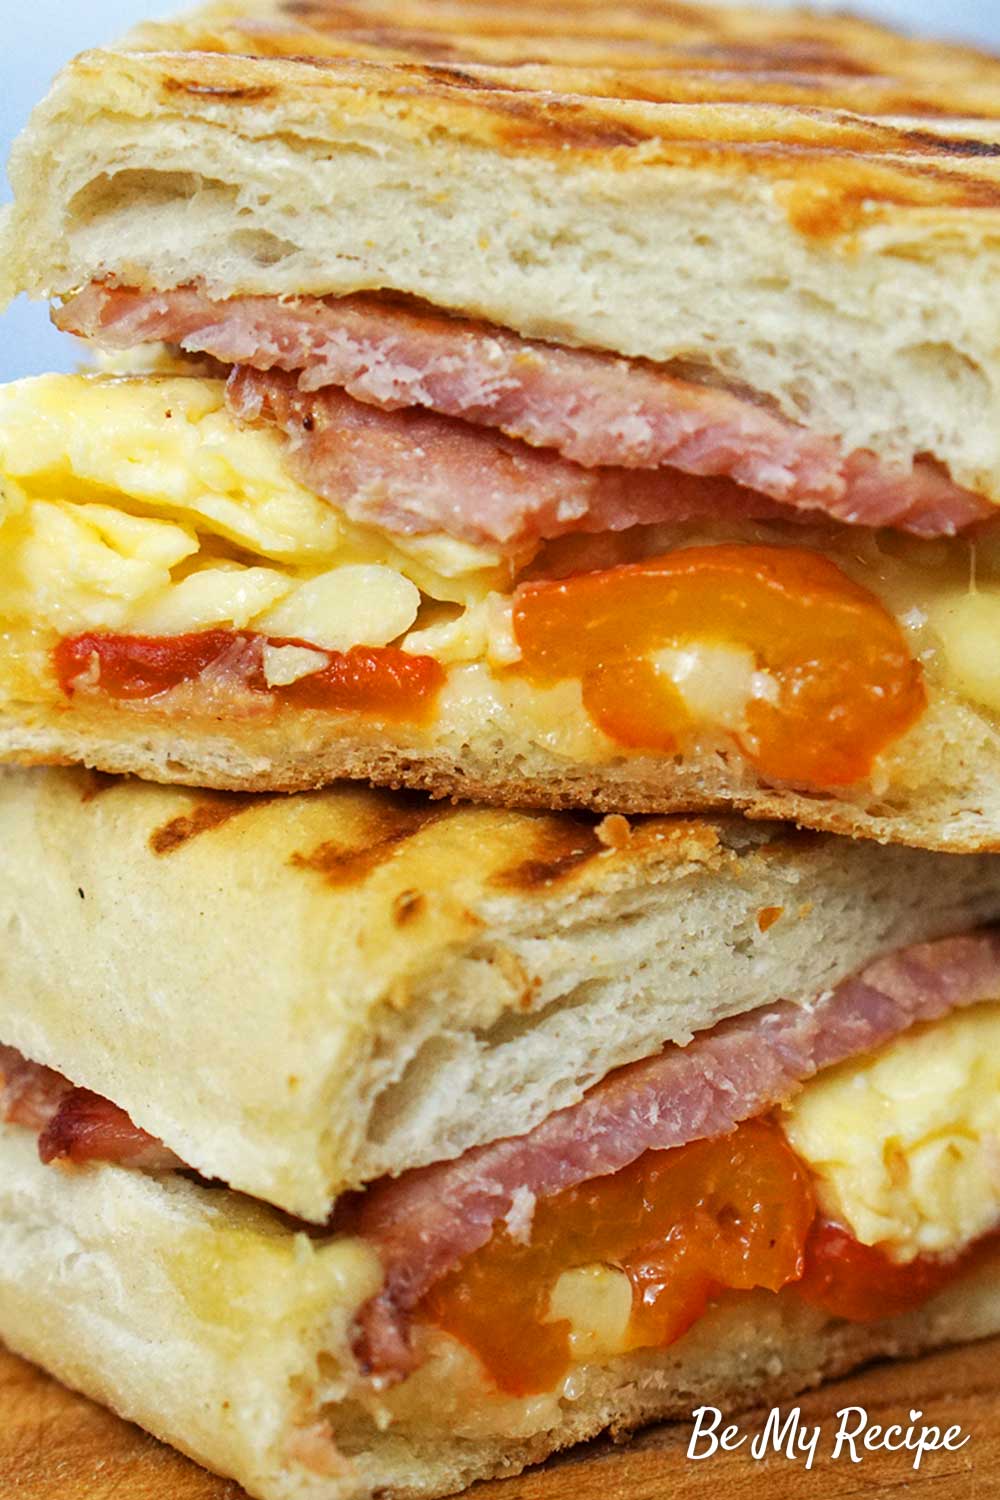 Breakfast Panini Recipe to Supercharge You in the Morning